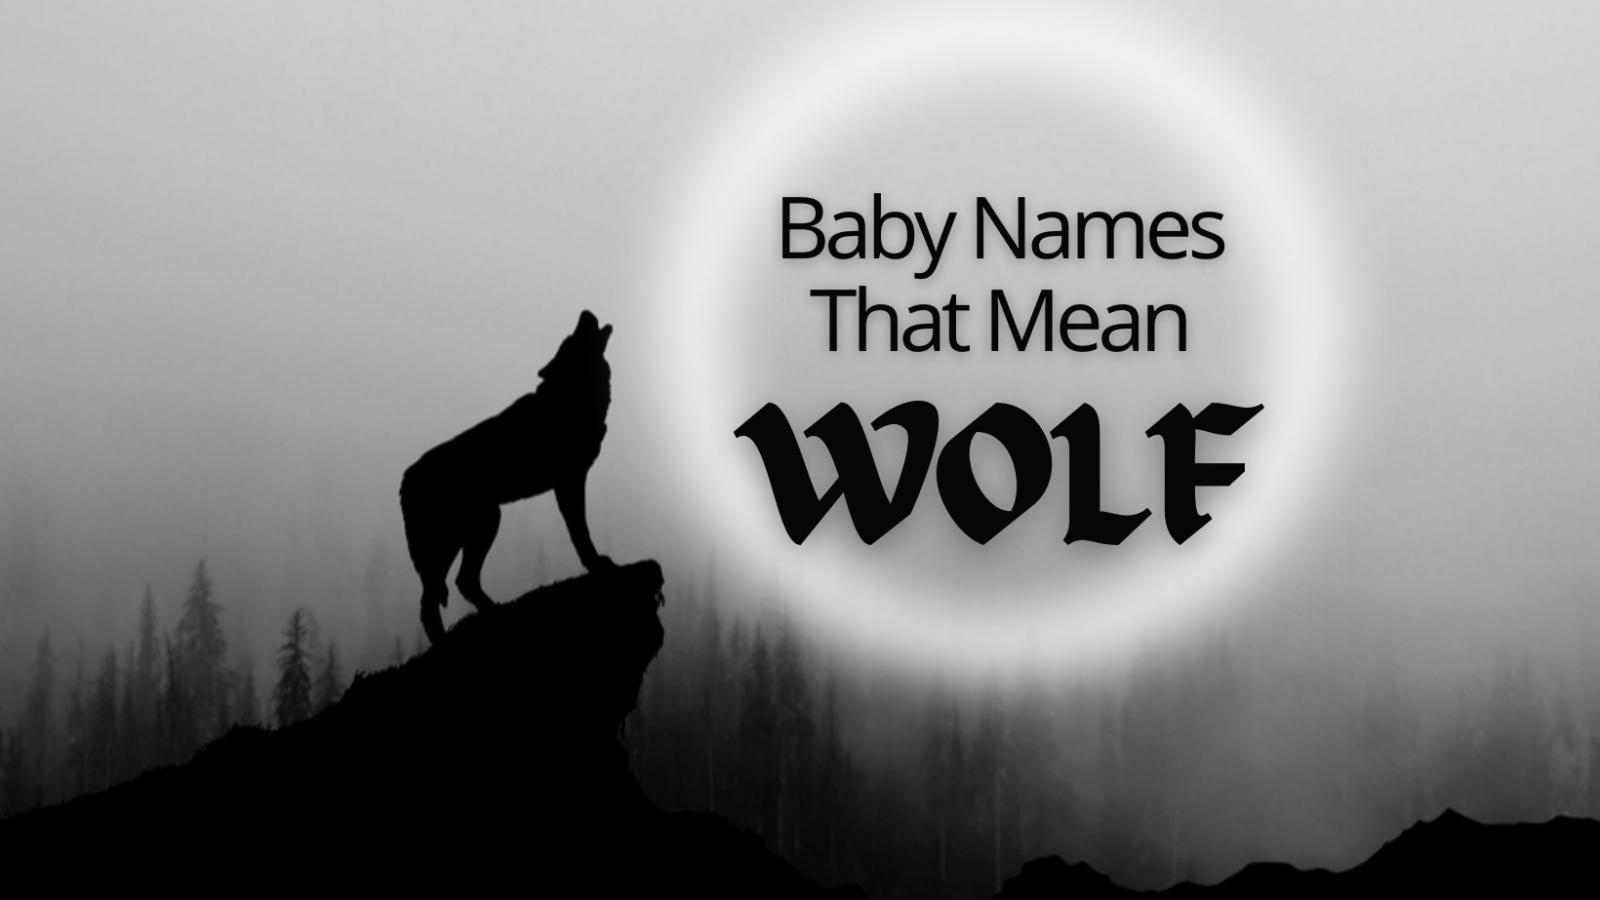 Are there any baby names that mean wolf?